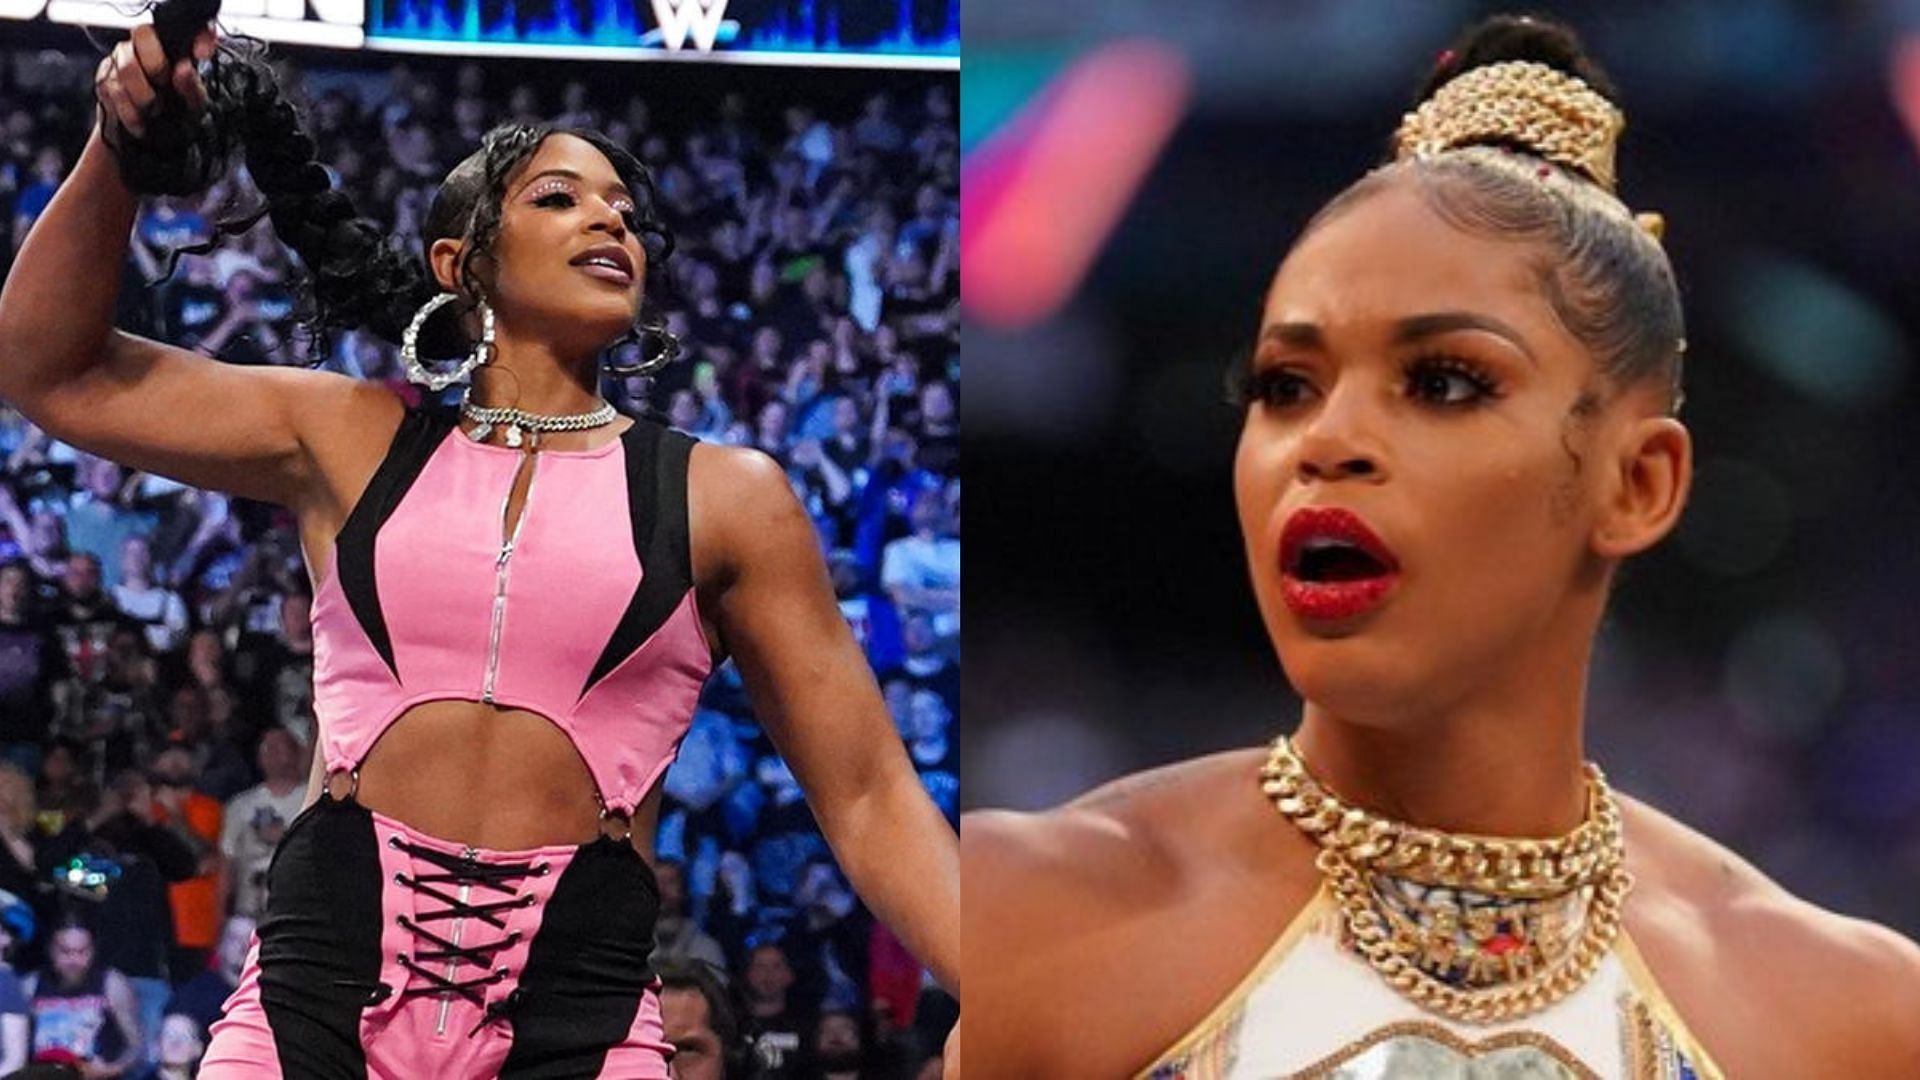 Bianca Belair will aim to become a two-time Women